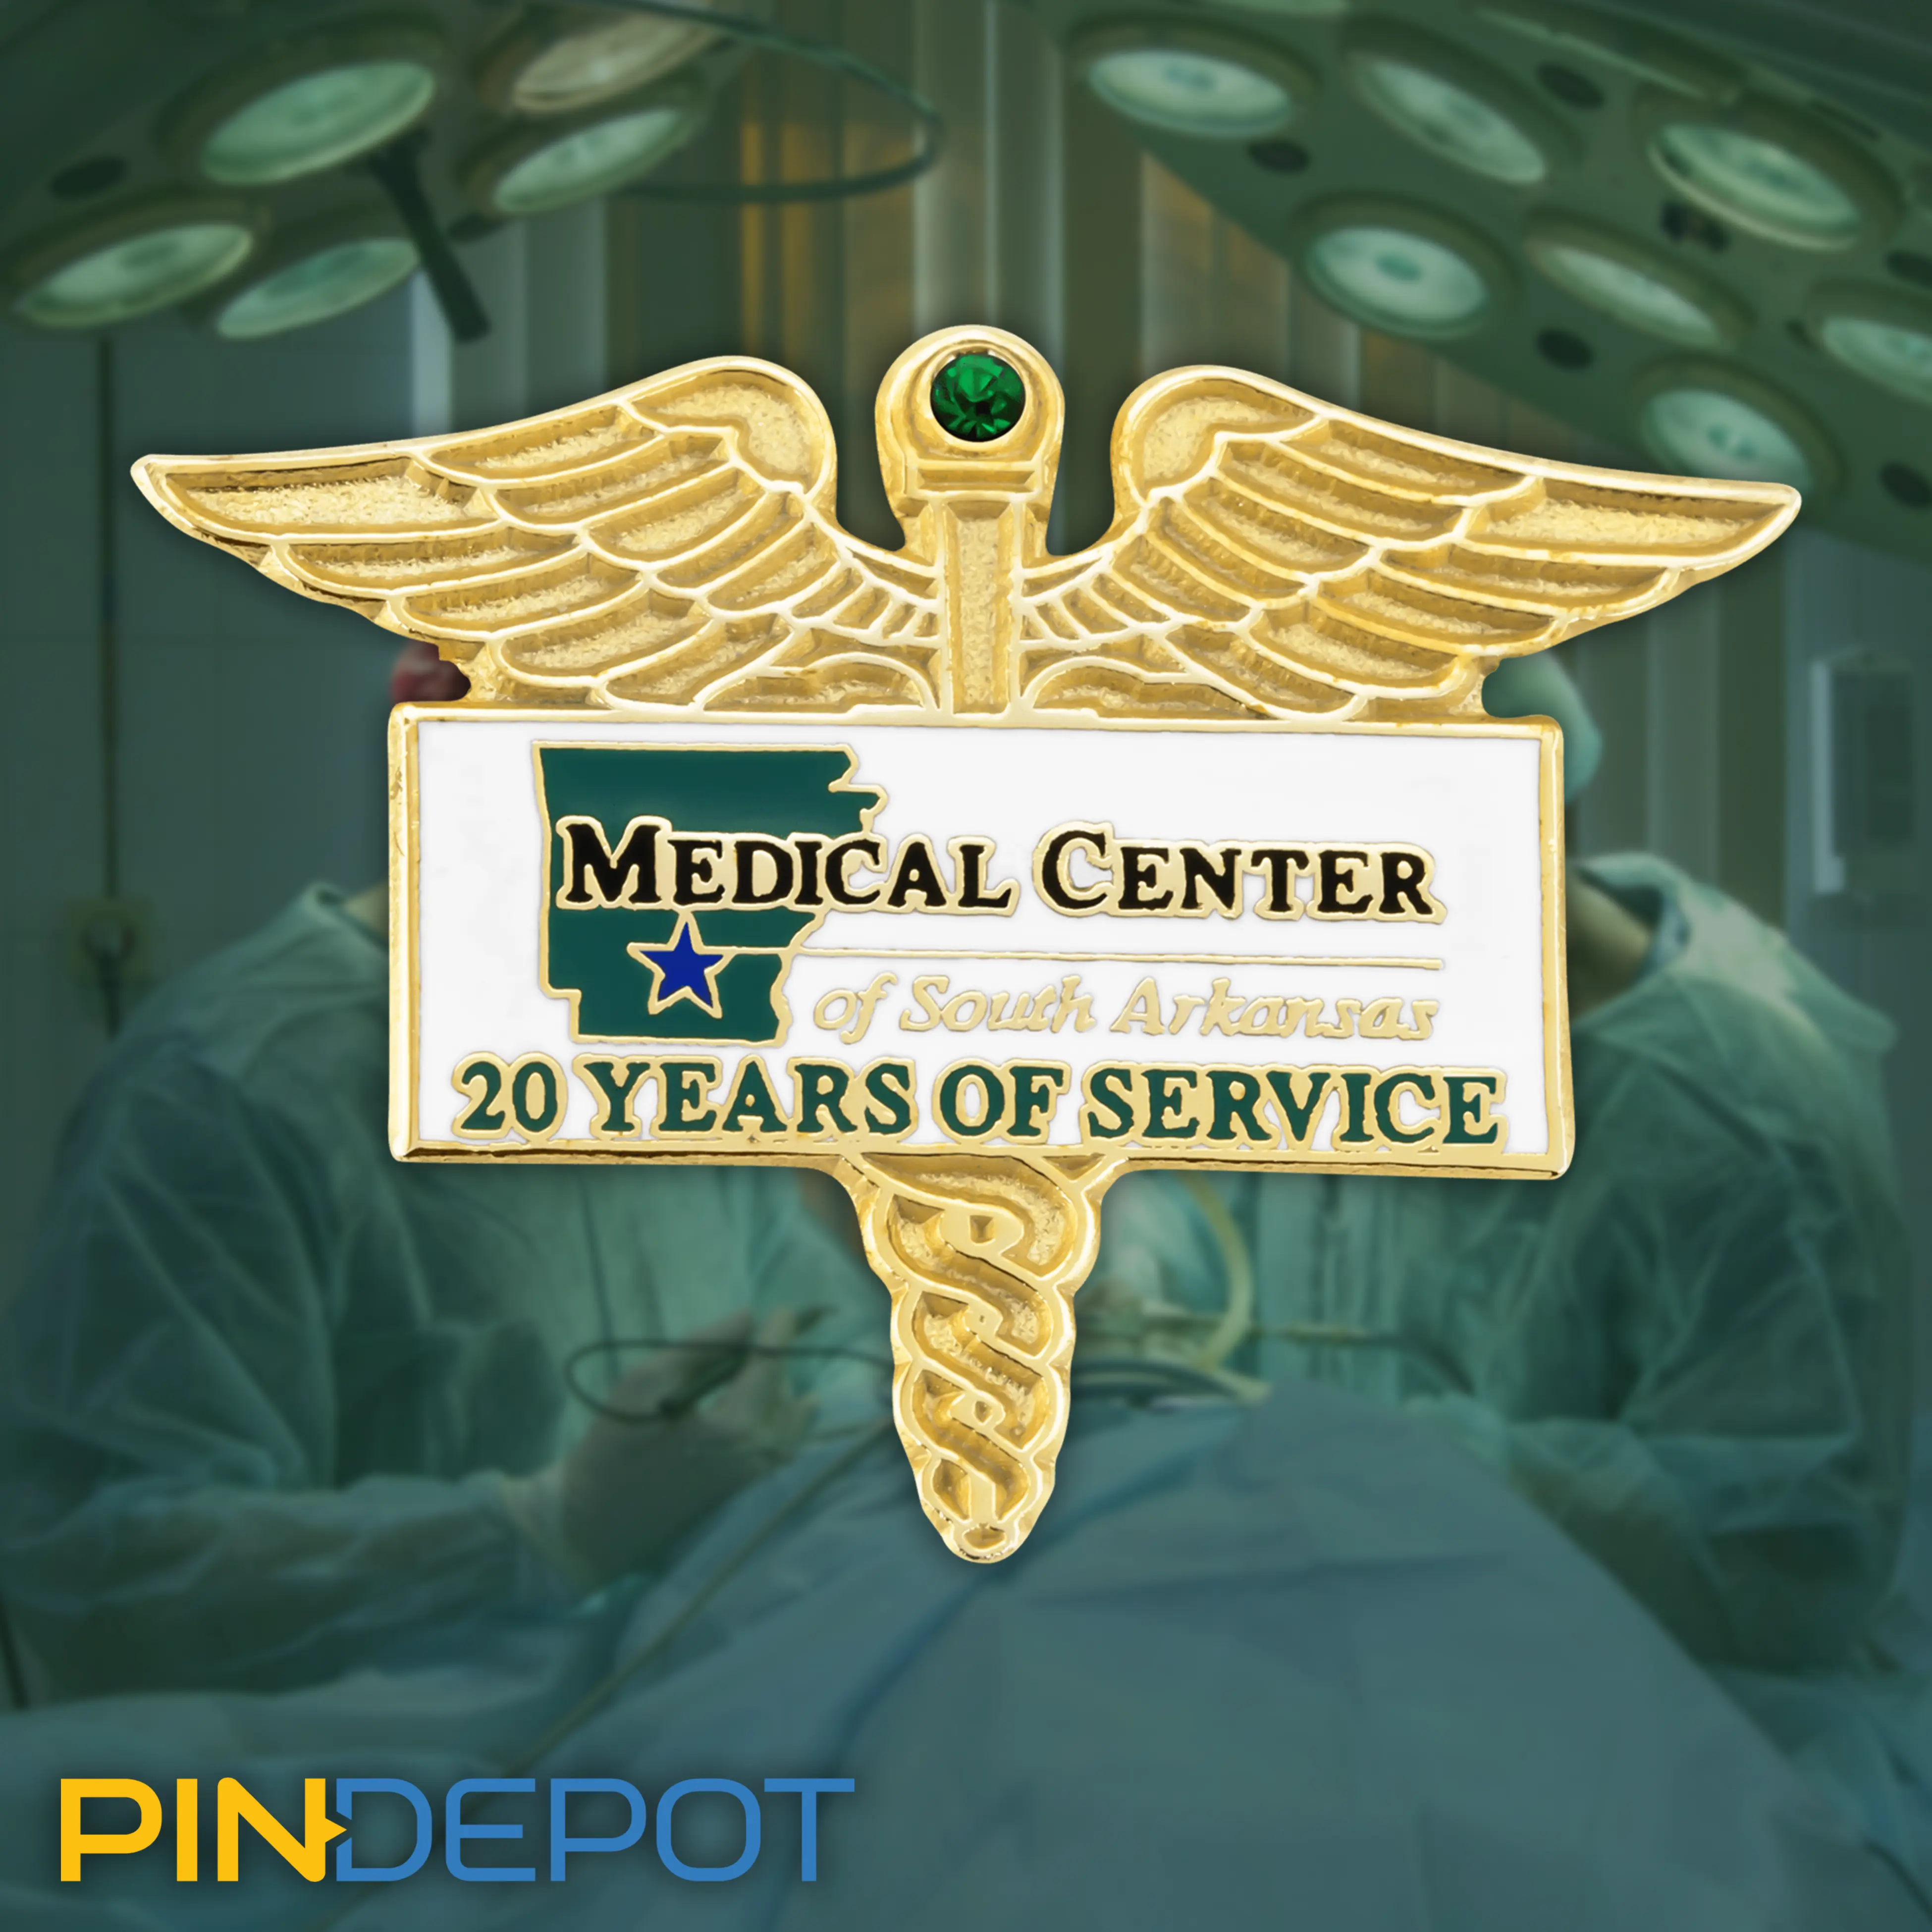 Medical Center of South Arkansas - 20 Years